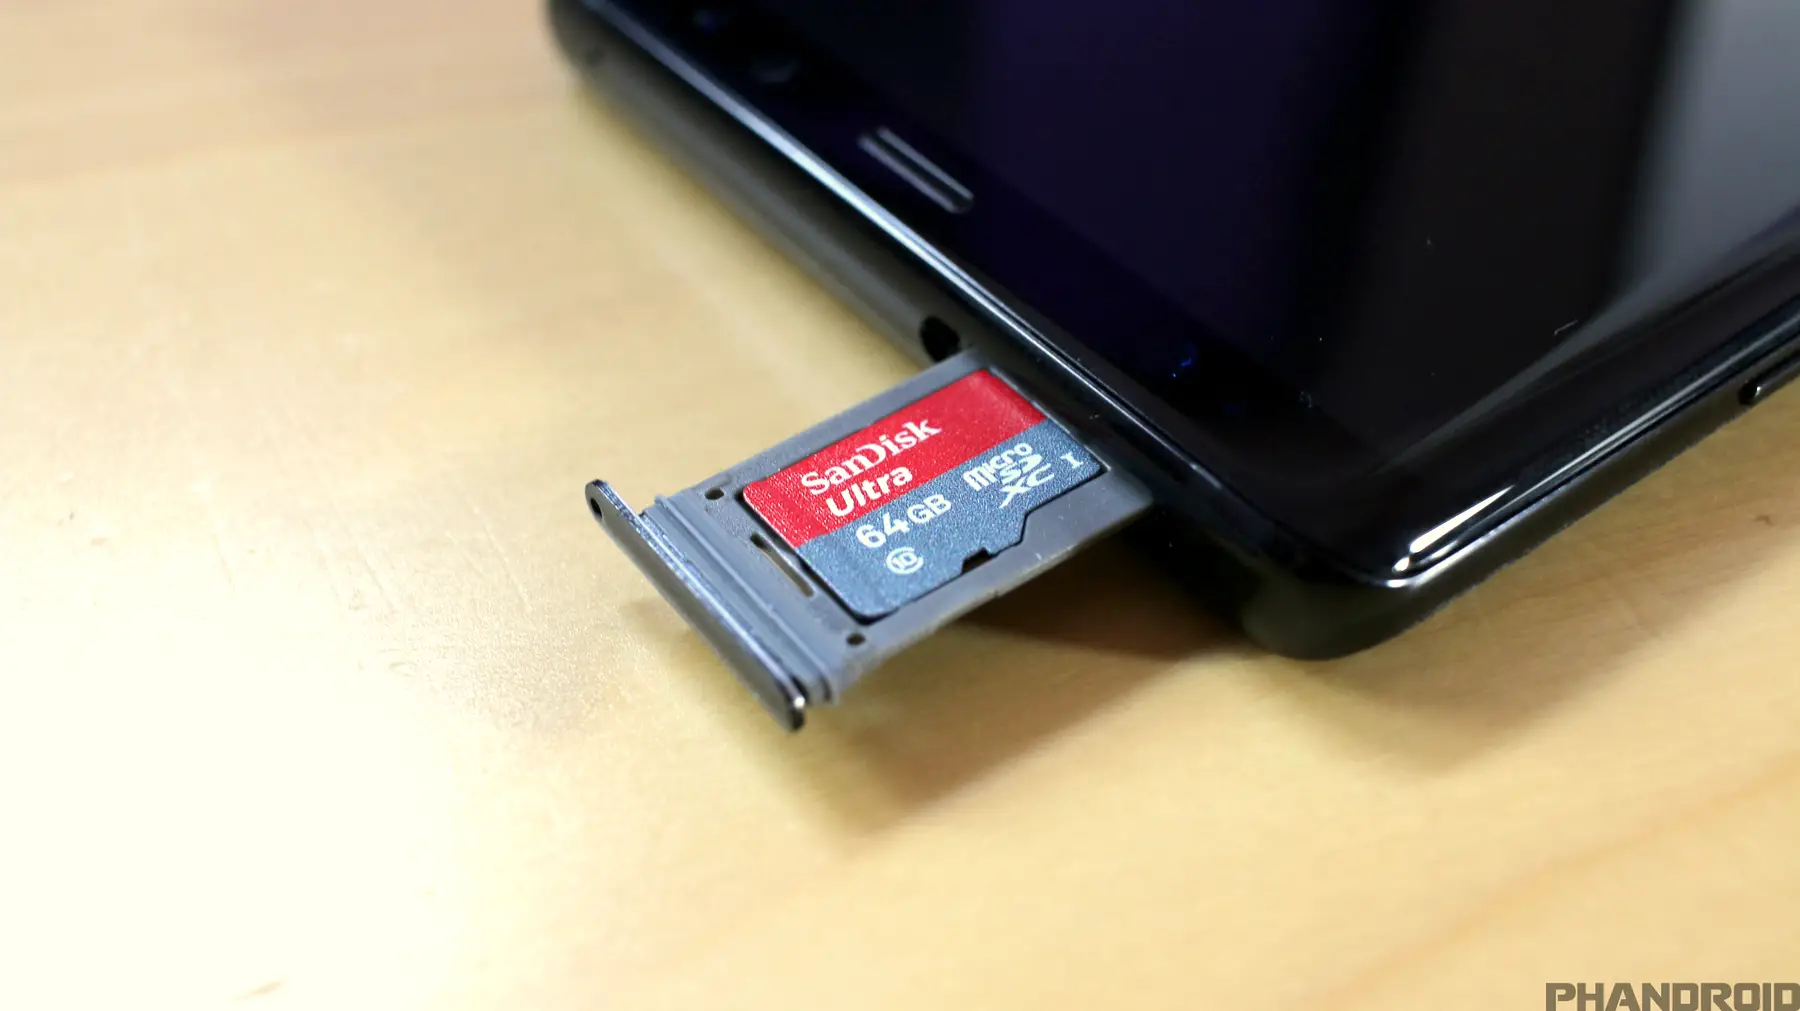 How to choose the right microSD card for your Android - CNET